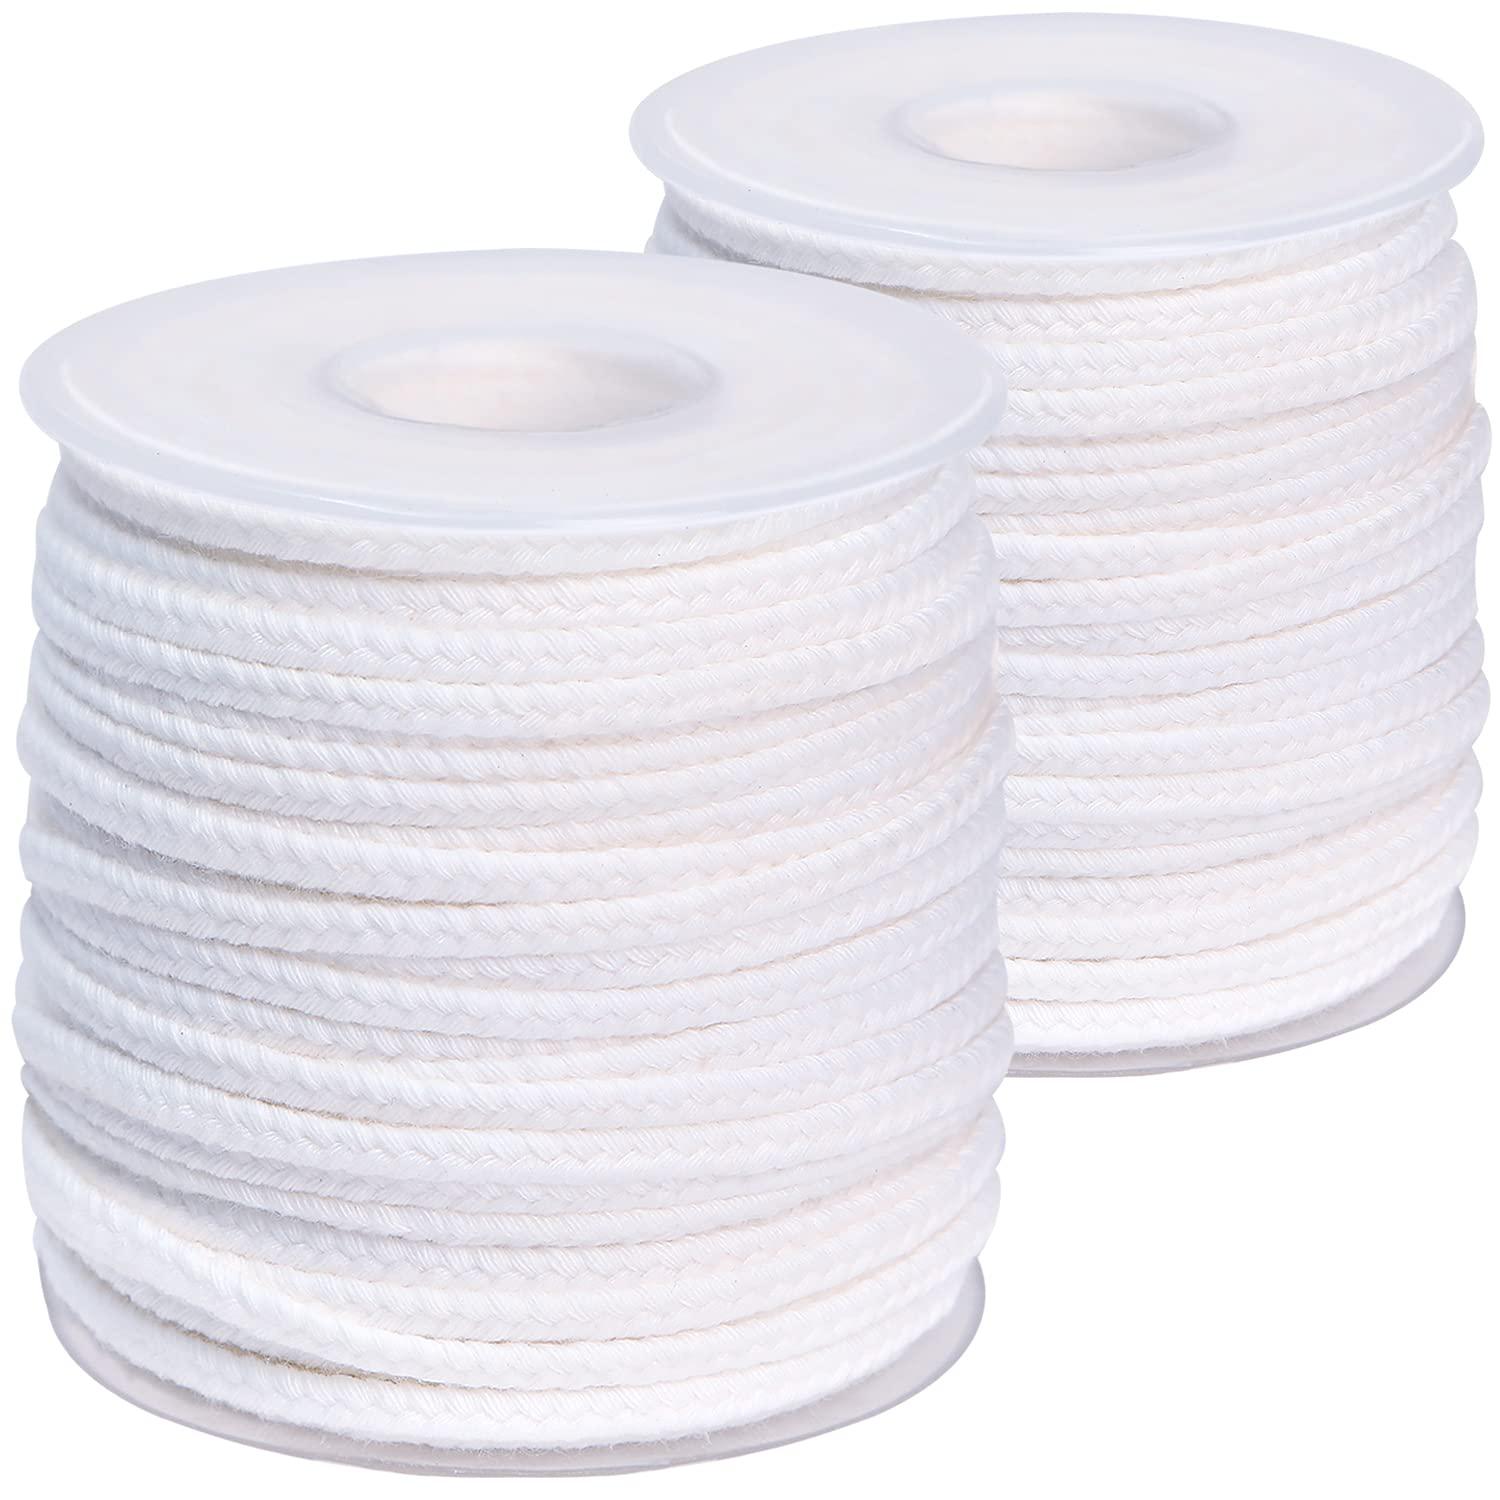 MadMedic 100% Cotton Candle Wick Bulk 200 ft 50 Ply Braided Wicks Spool Candle Wicks for Candle Making in Max Dia 5.13 inch Pillar, CA